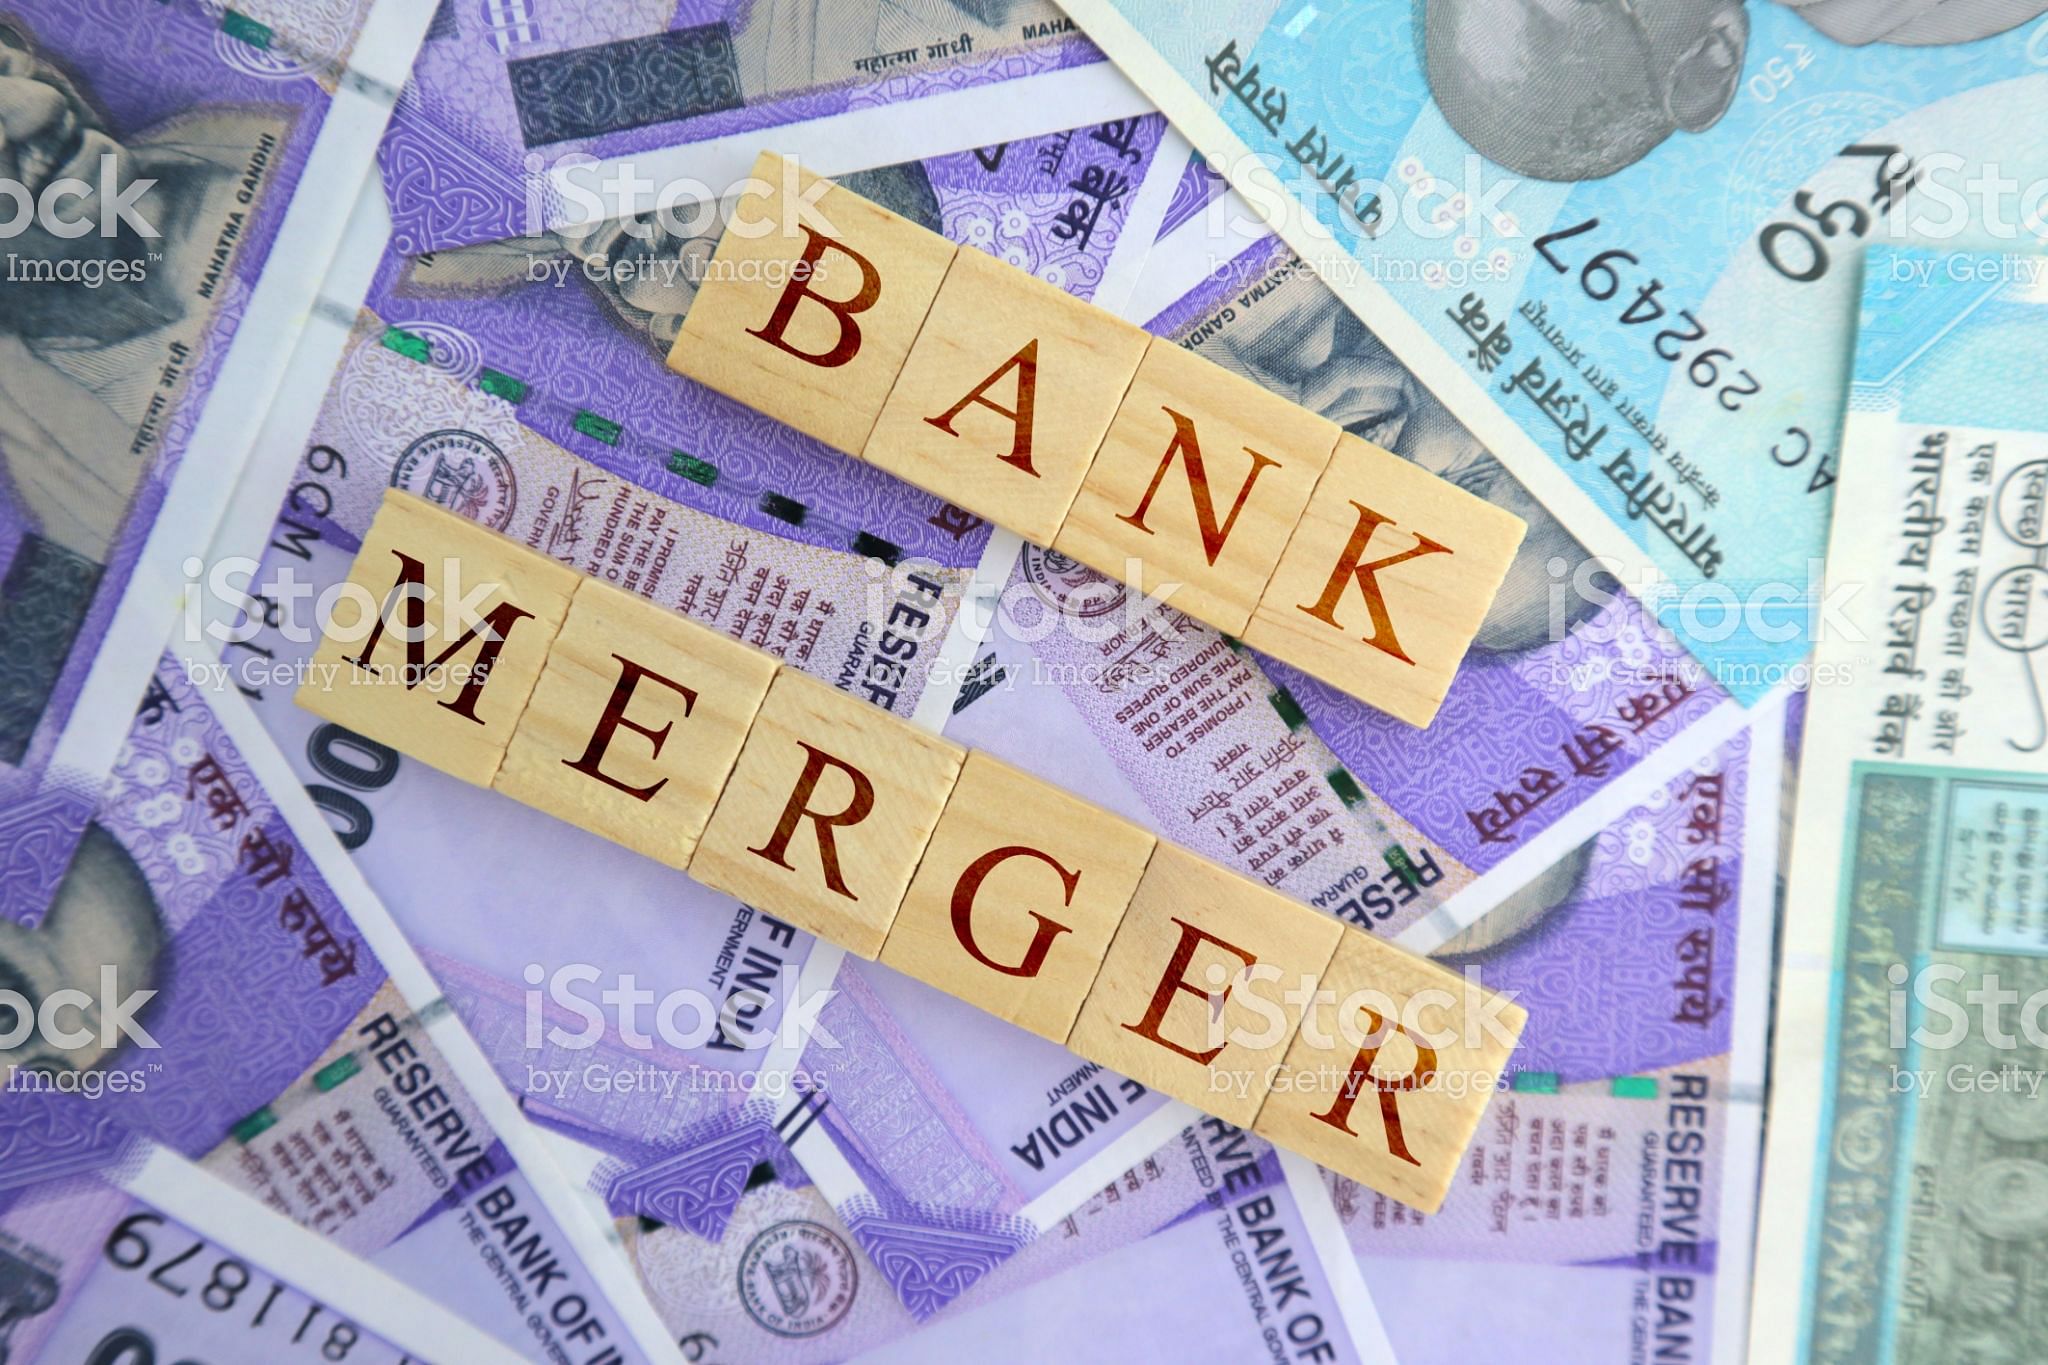 Union Cabinet approved amalgamation of 10 state-owned lenders (Image for representation/ iStock)